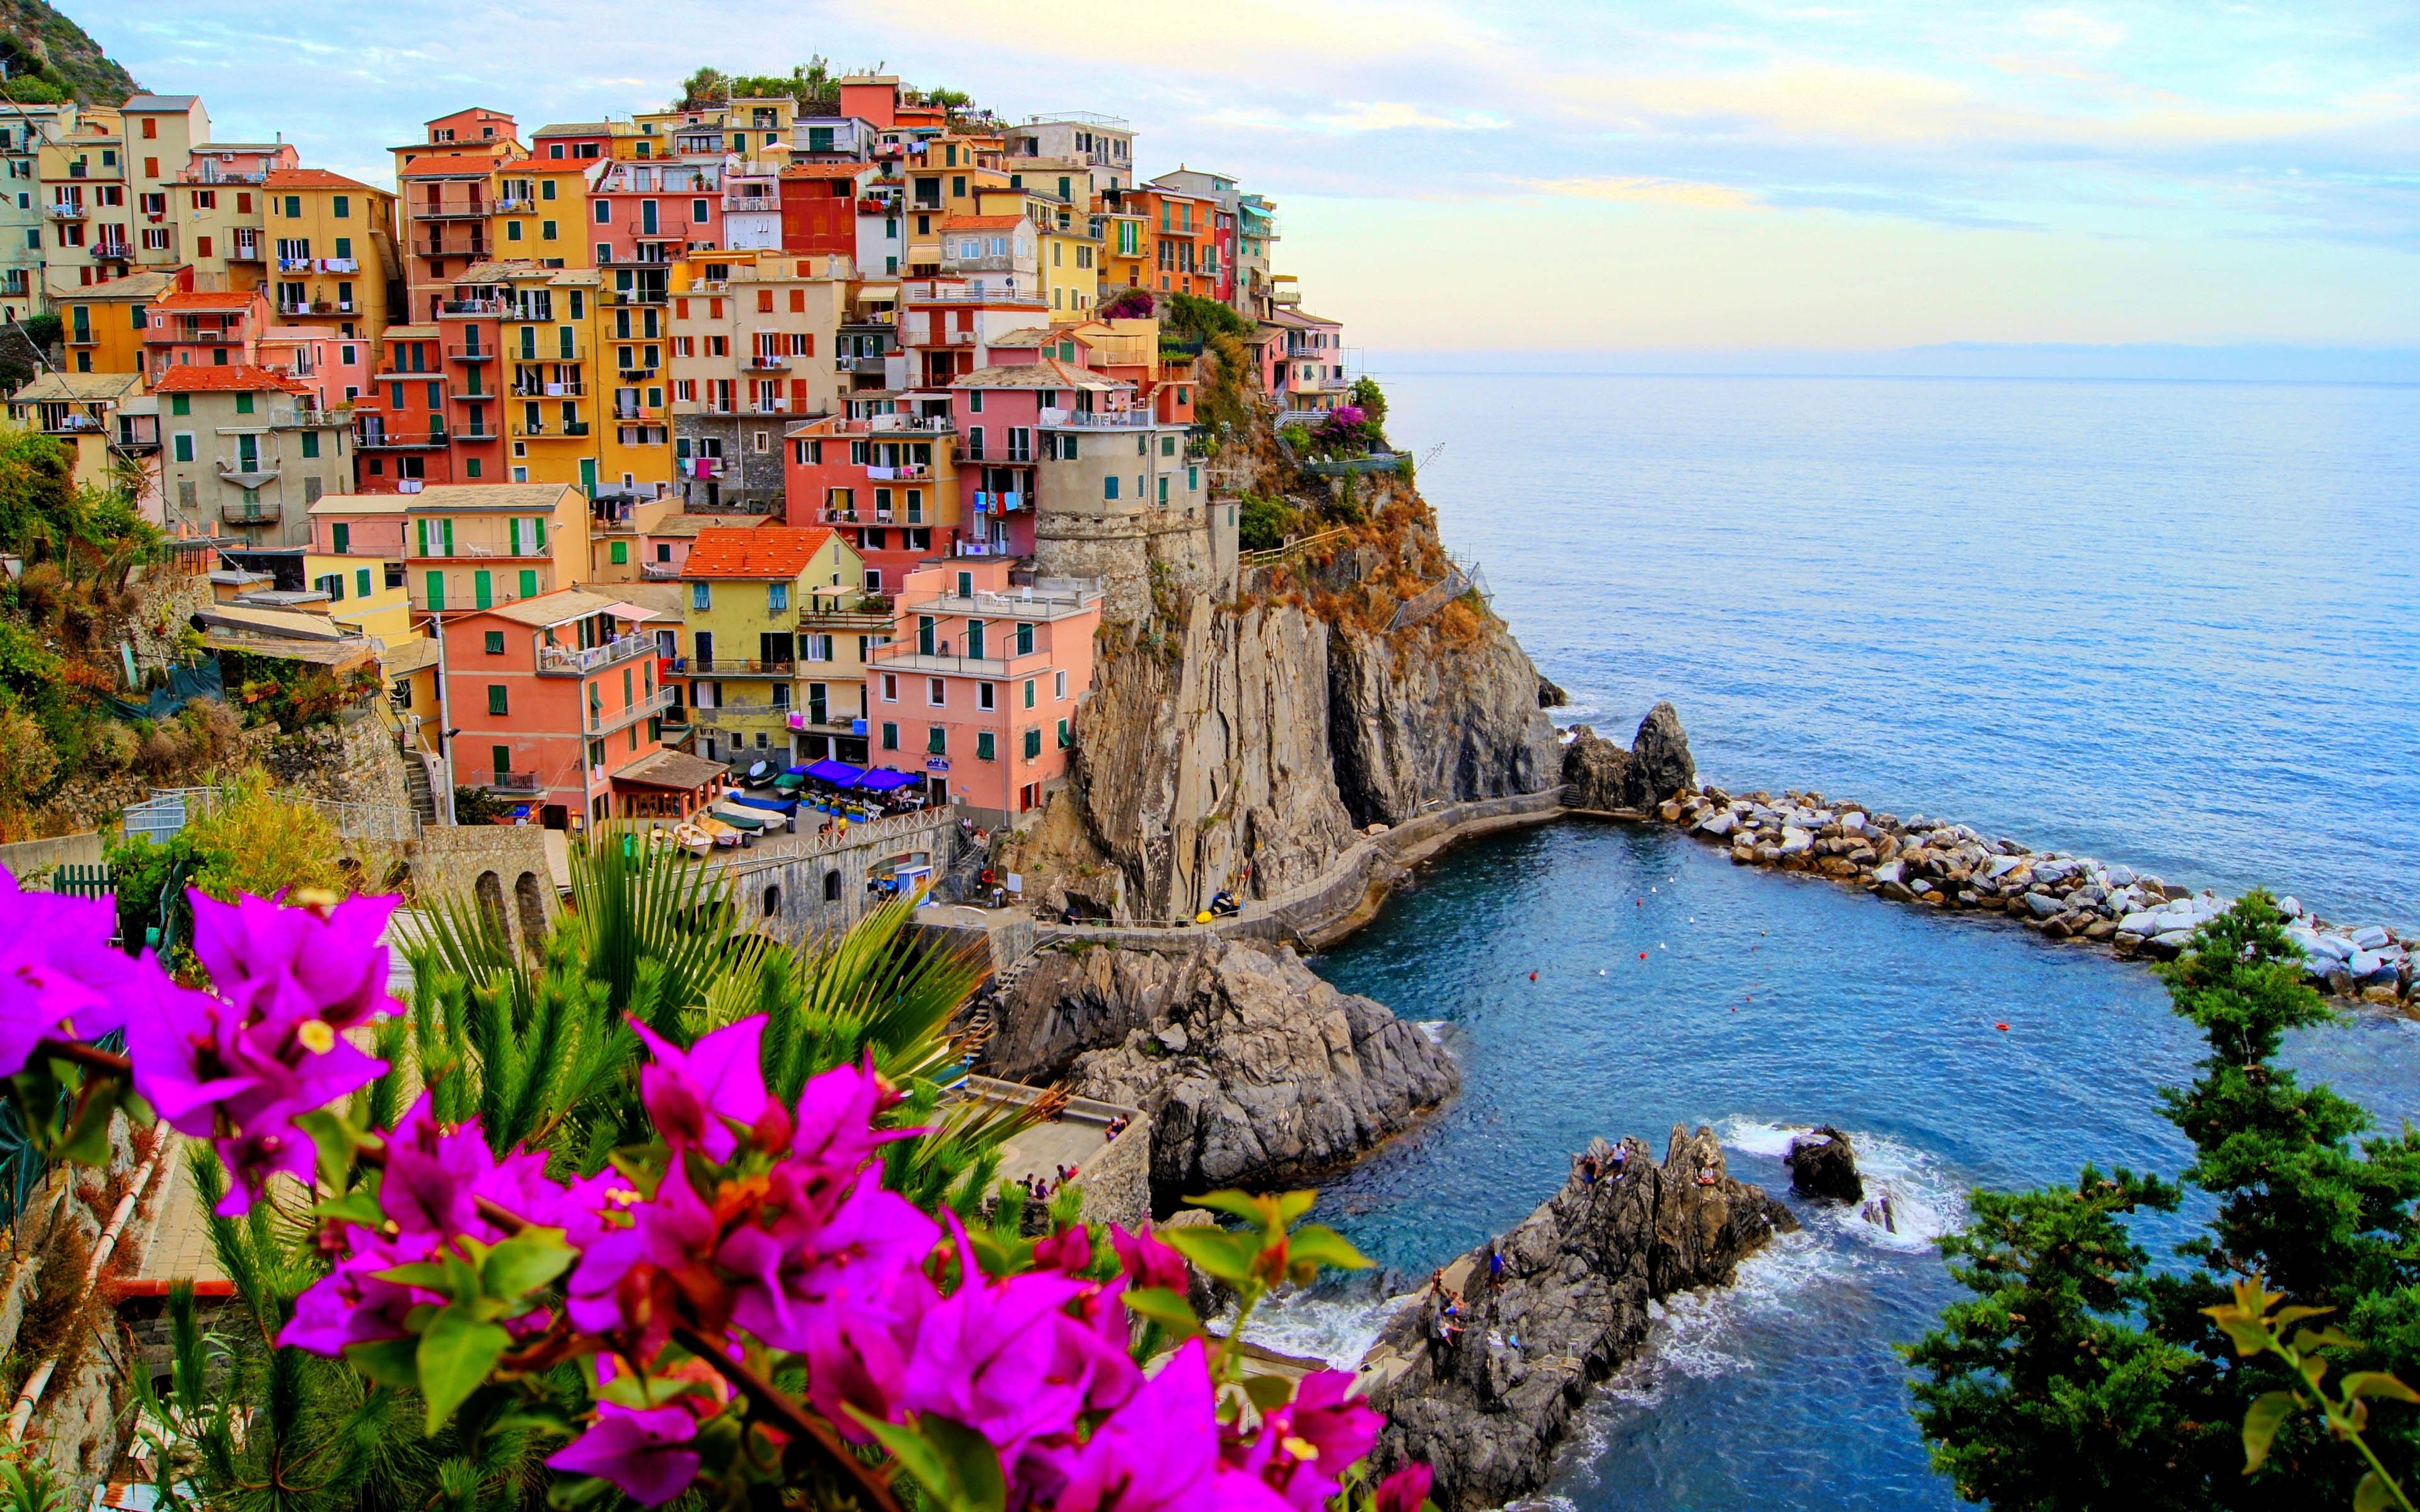 Italy Landscape City House Building Colorful Water Manarola 3840x2400